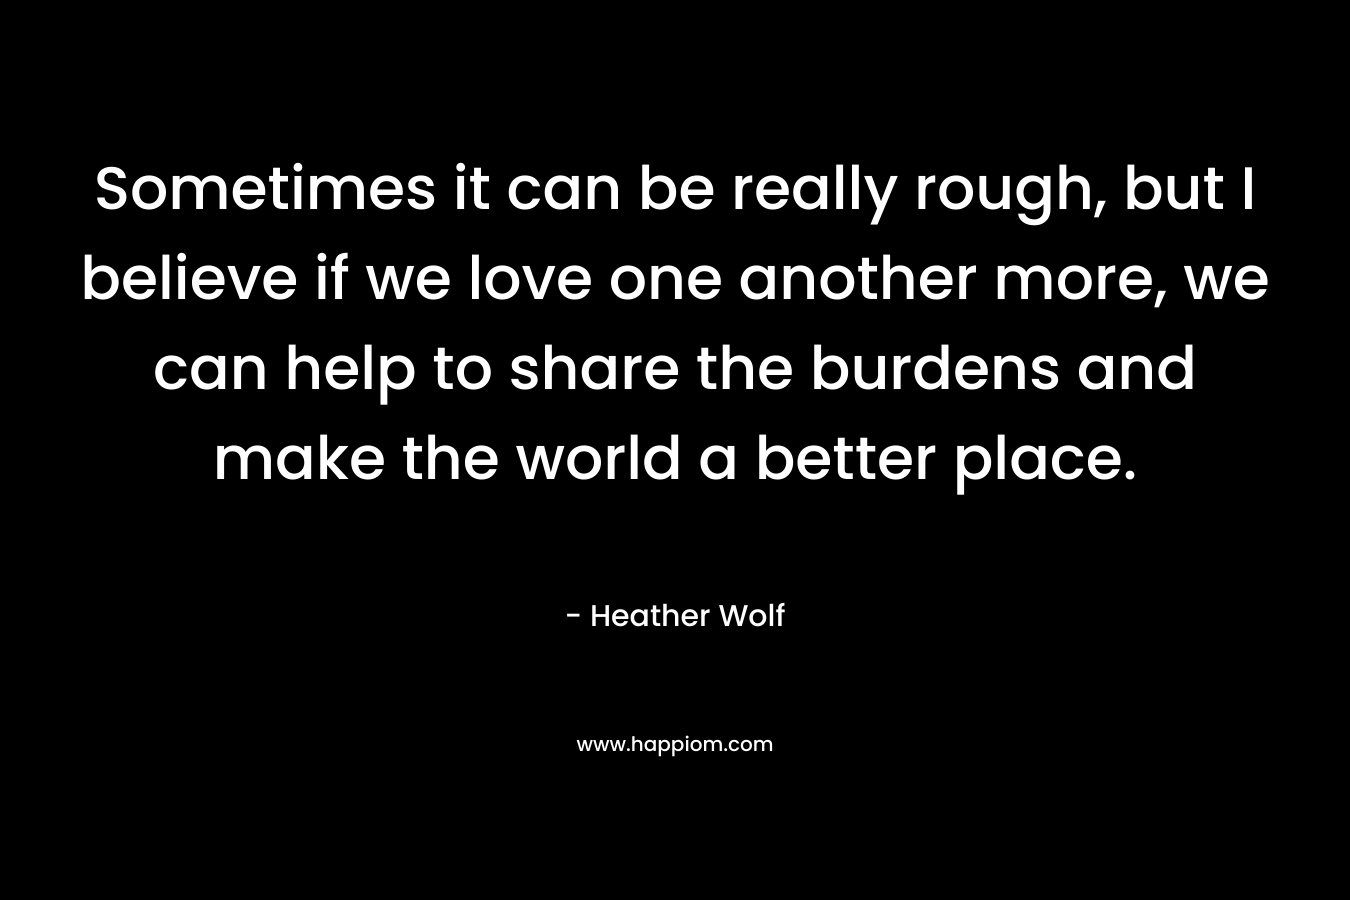 Sometimes it can be really rough, but I believe if we love one another more, we can help to share the burdens and make the world a better place. – Heather Wolf